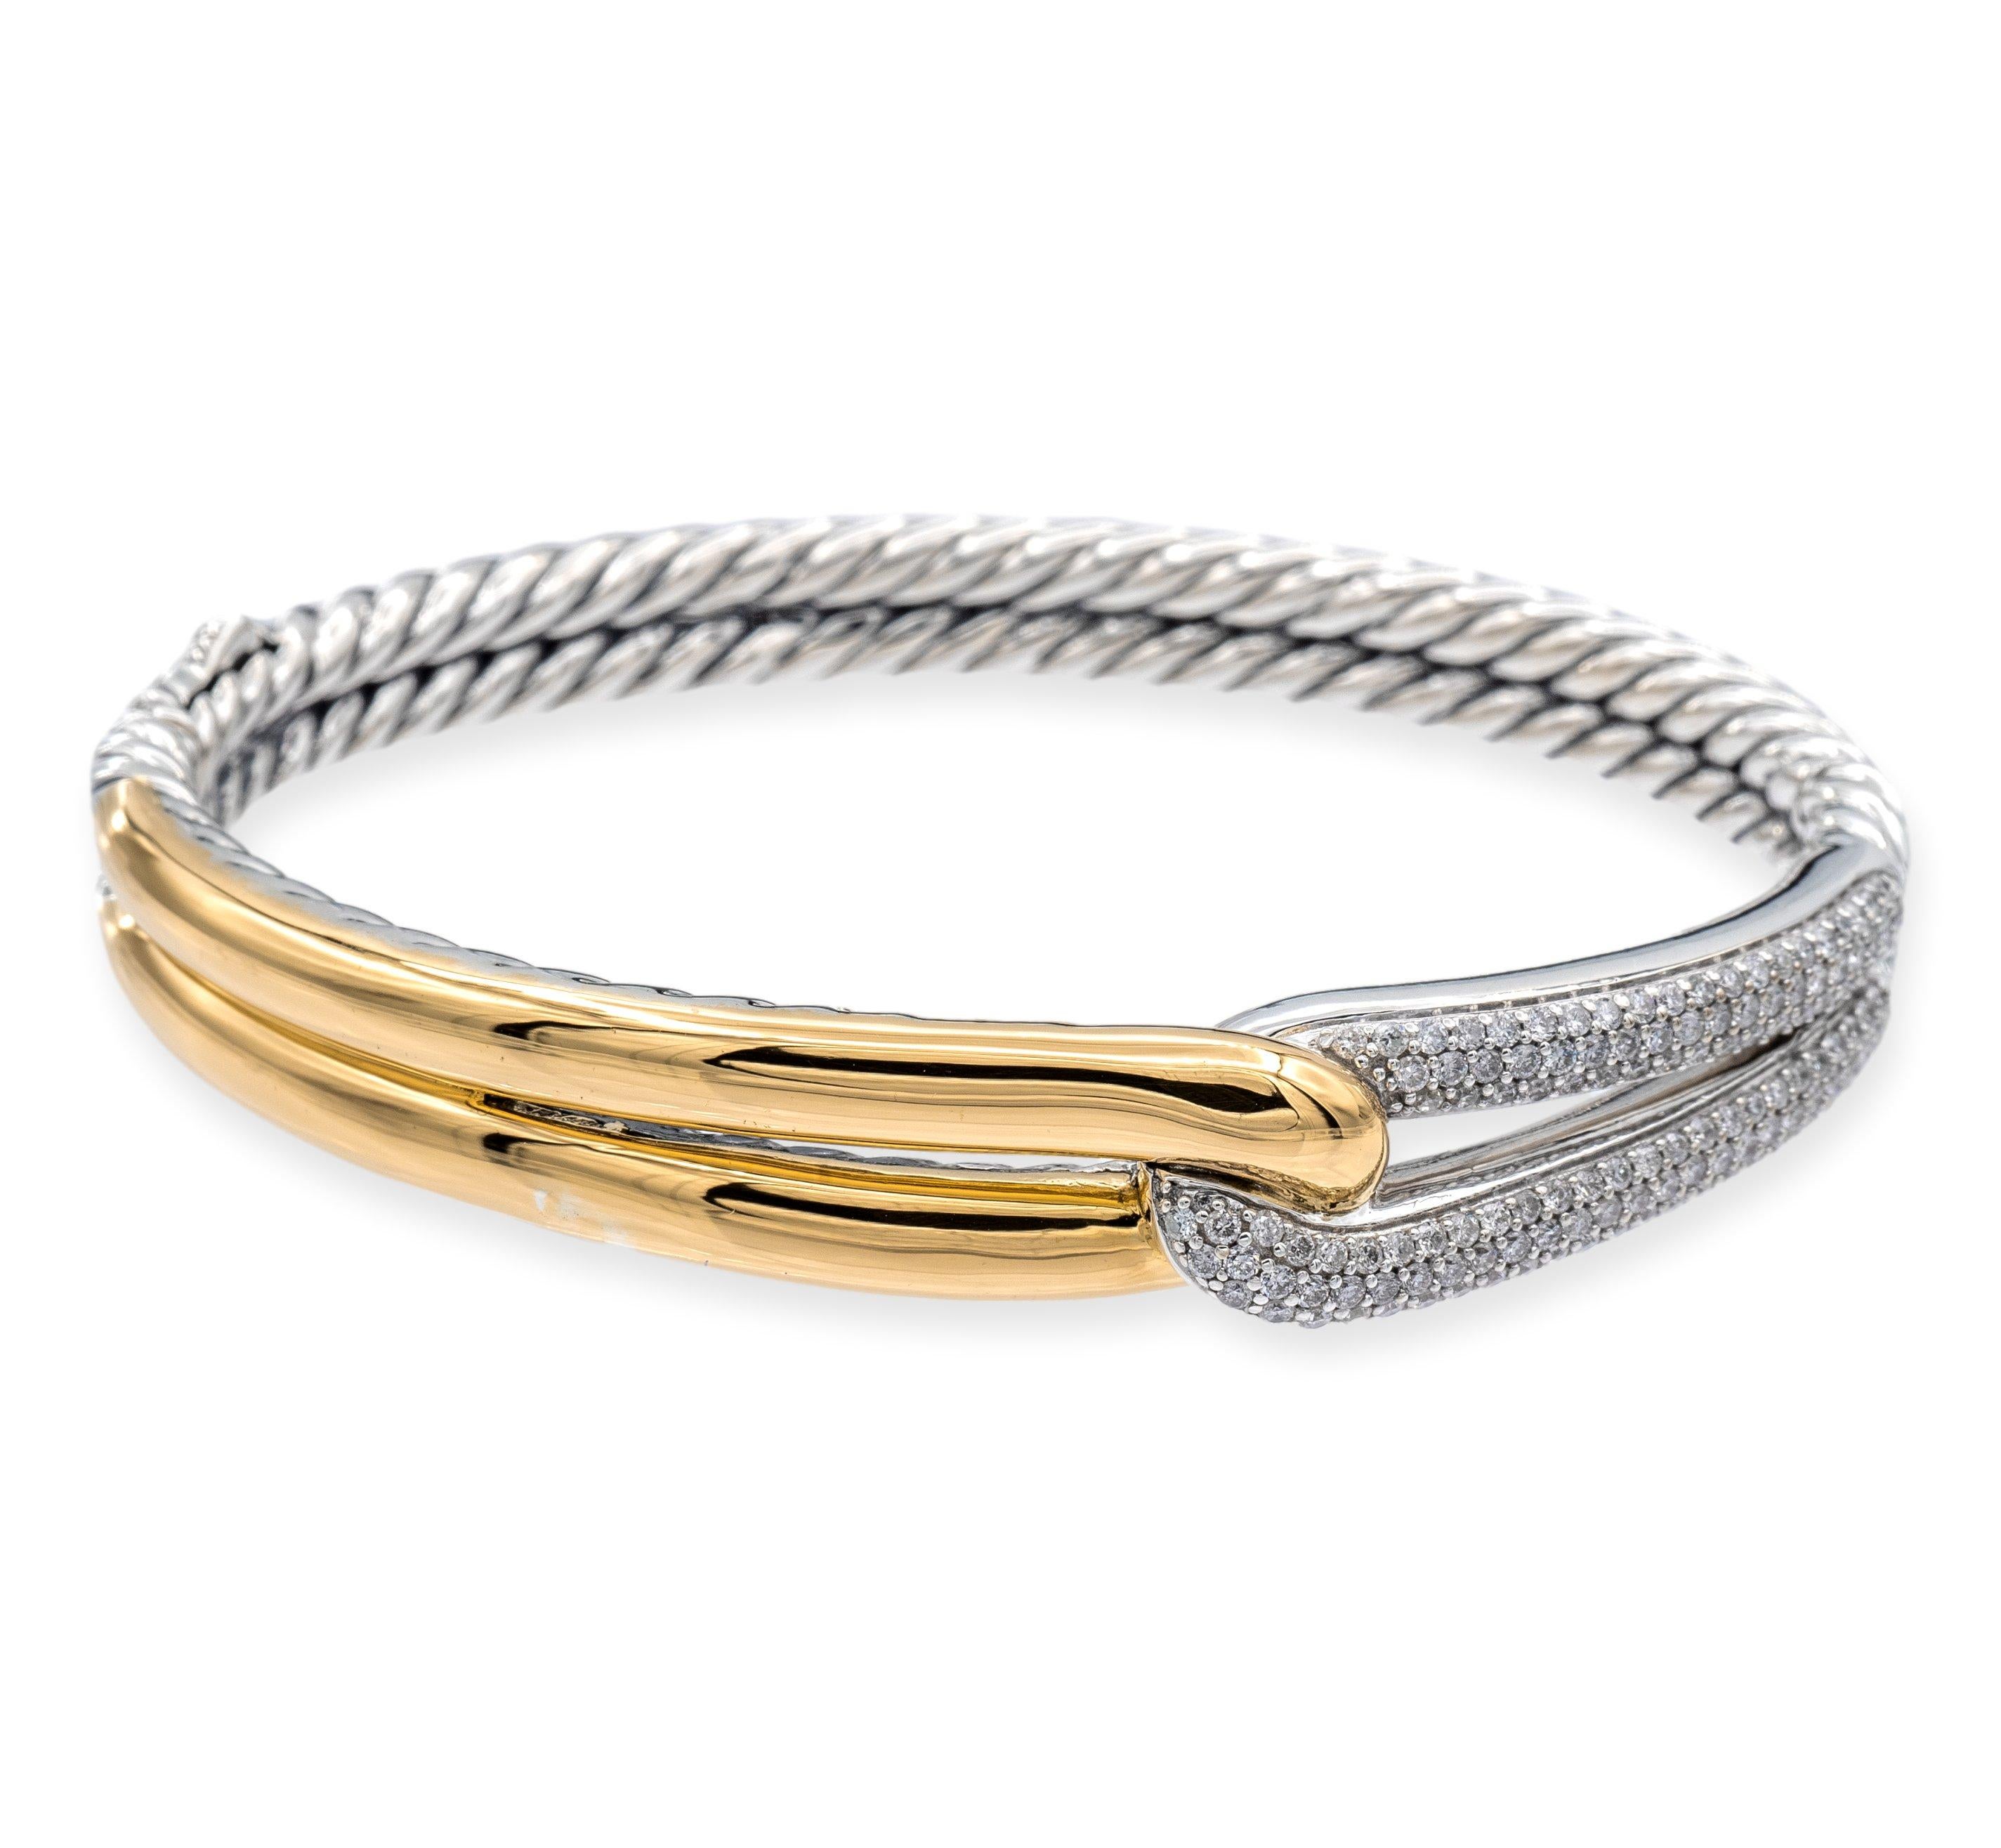 The David Yurman single loop bangle from the Labyrinth Collection is a beautiful blend of fine sterling silver and 18 karat yellow gold. Its smooth cable design and push button closure create a sleek and sophisticated look set with round brilliant